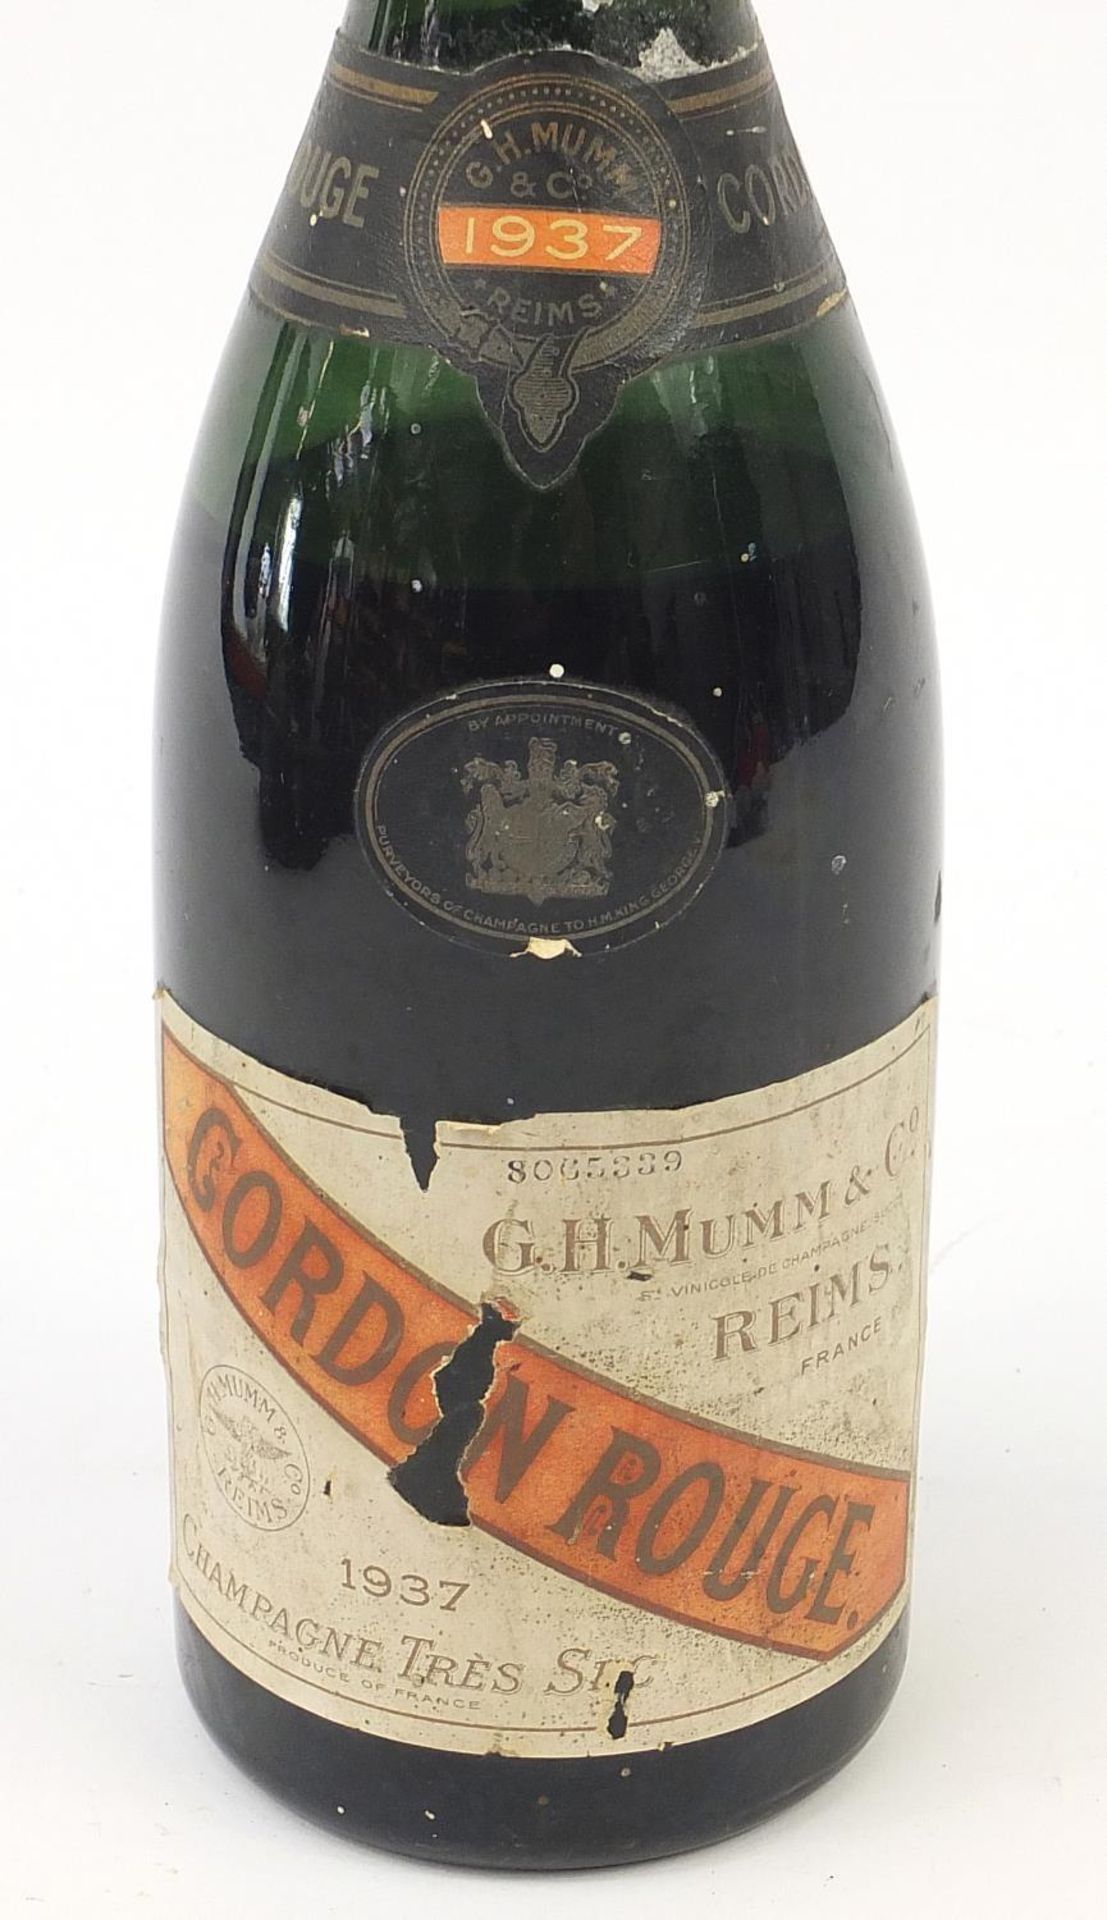 Magnum bottle of 1937 Cordon Rouge Champagne - Image 2 of 4